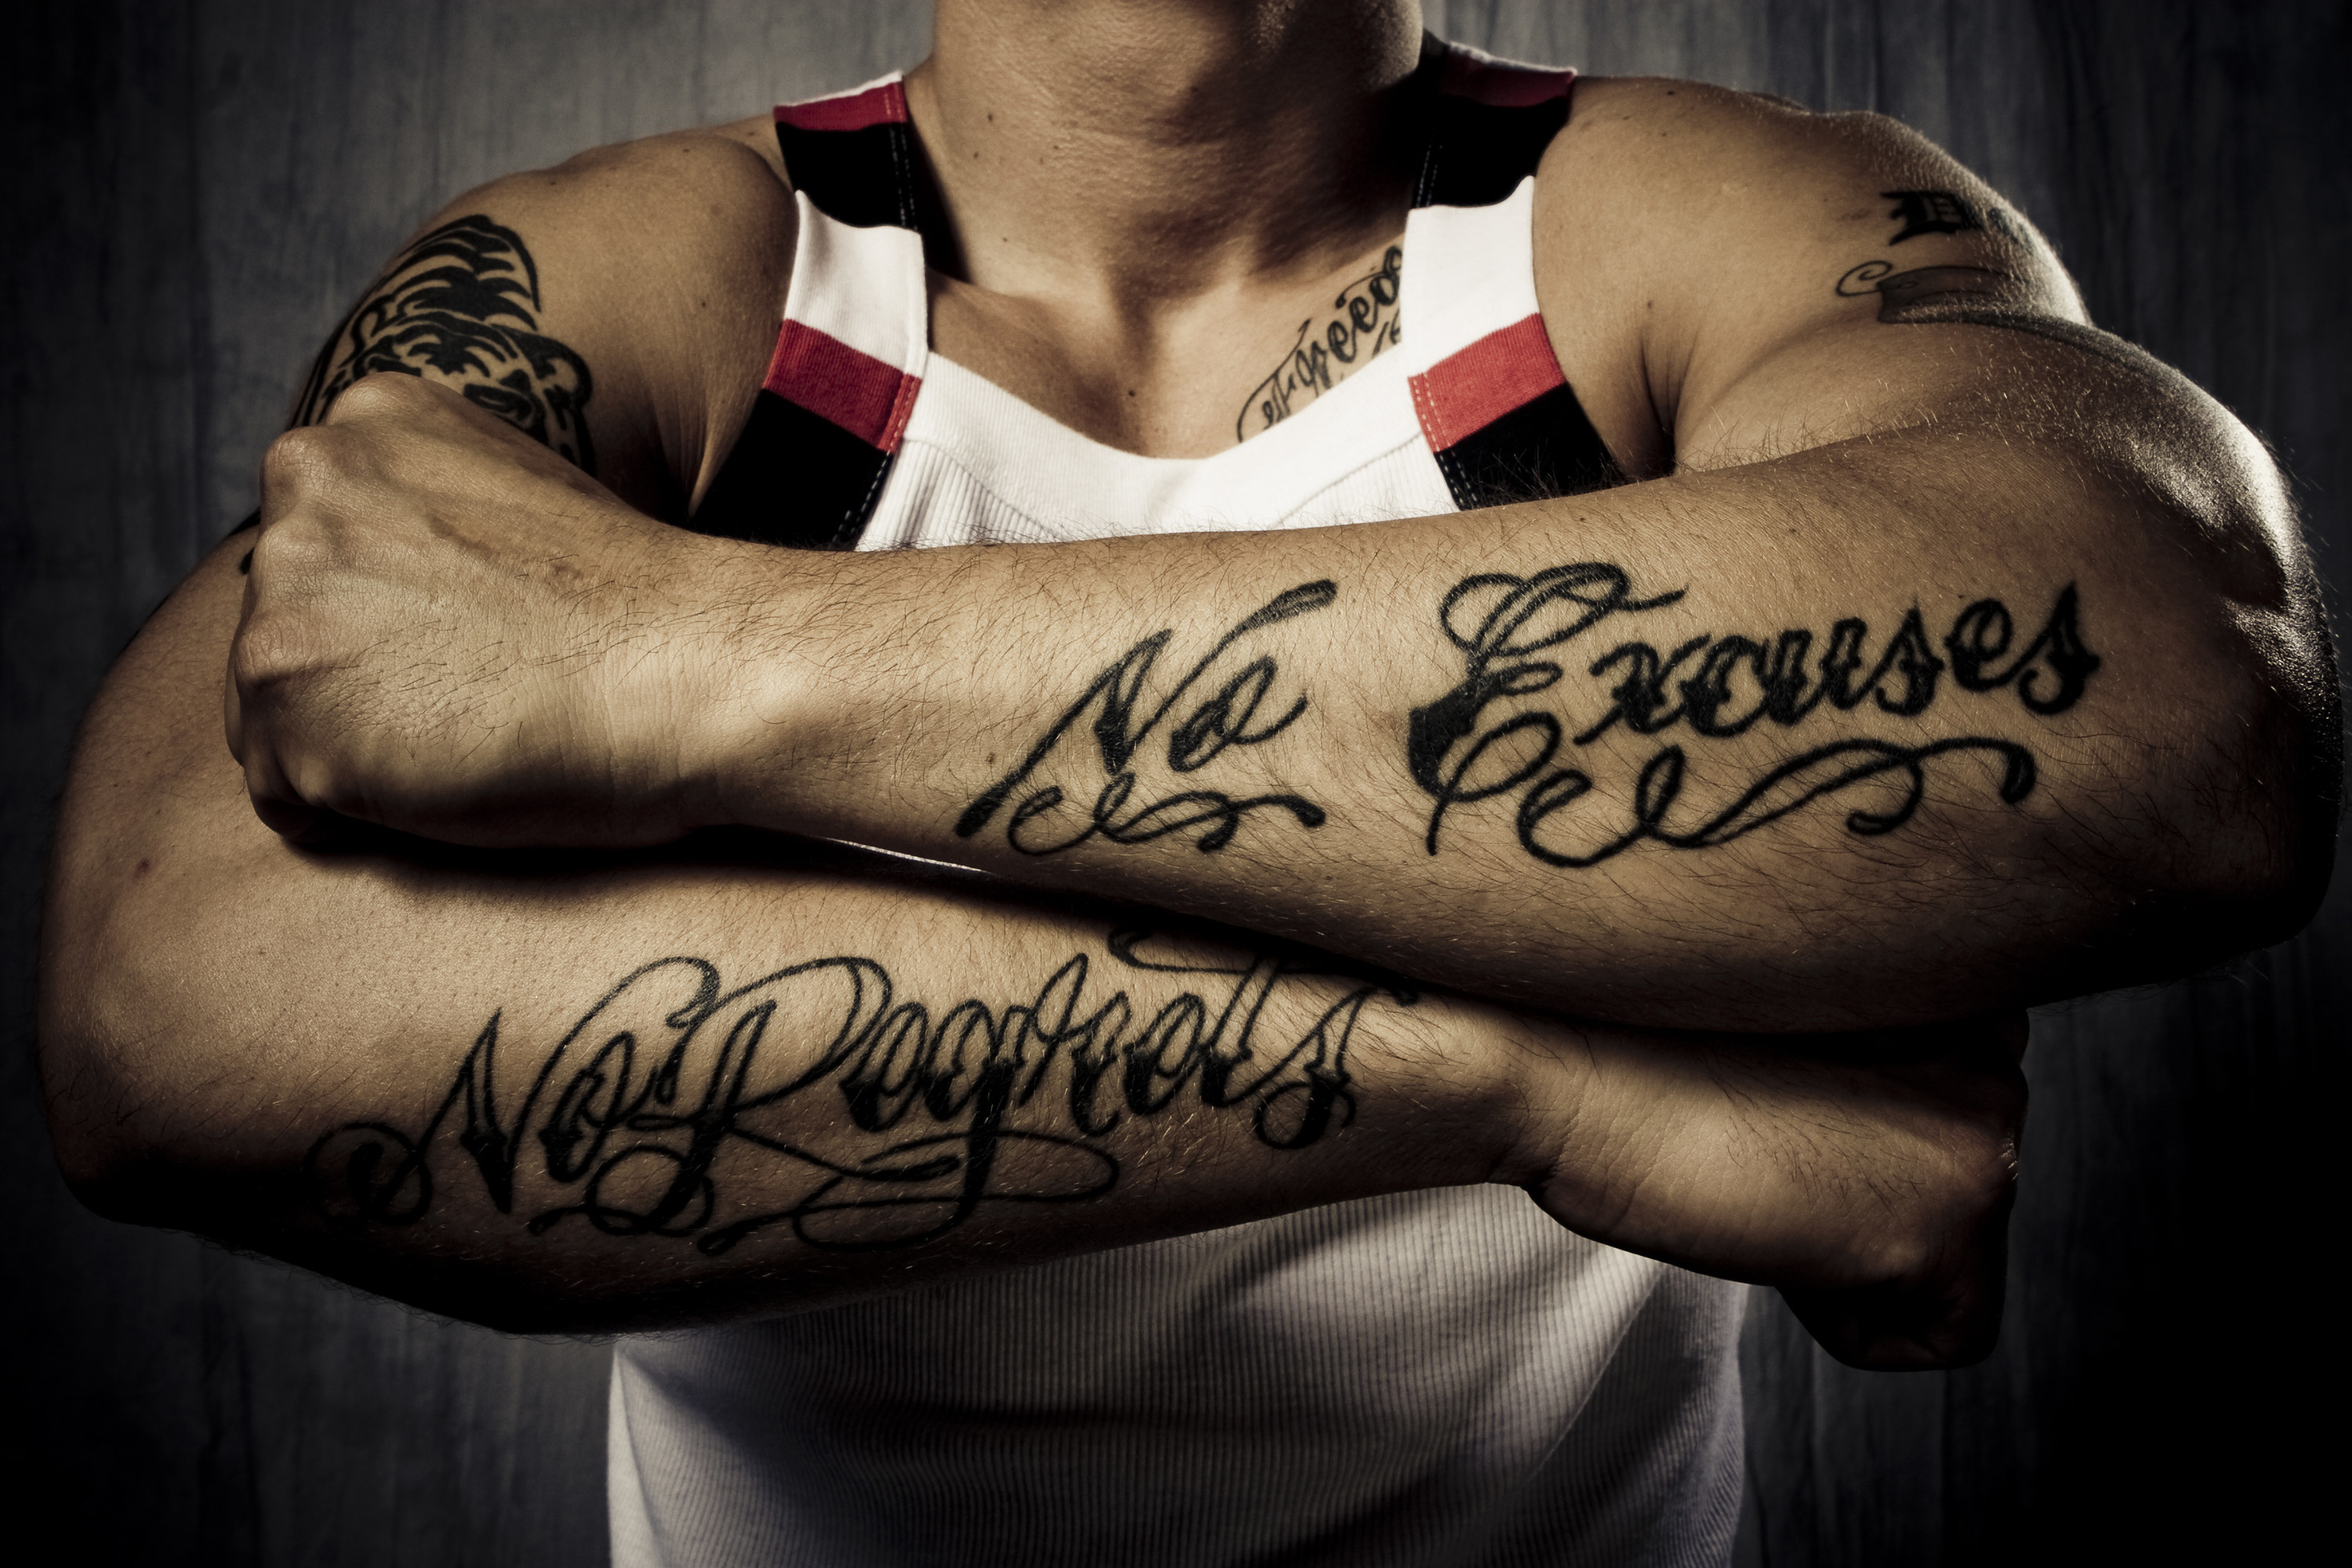 A man showing his arm tattoos